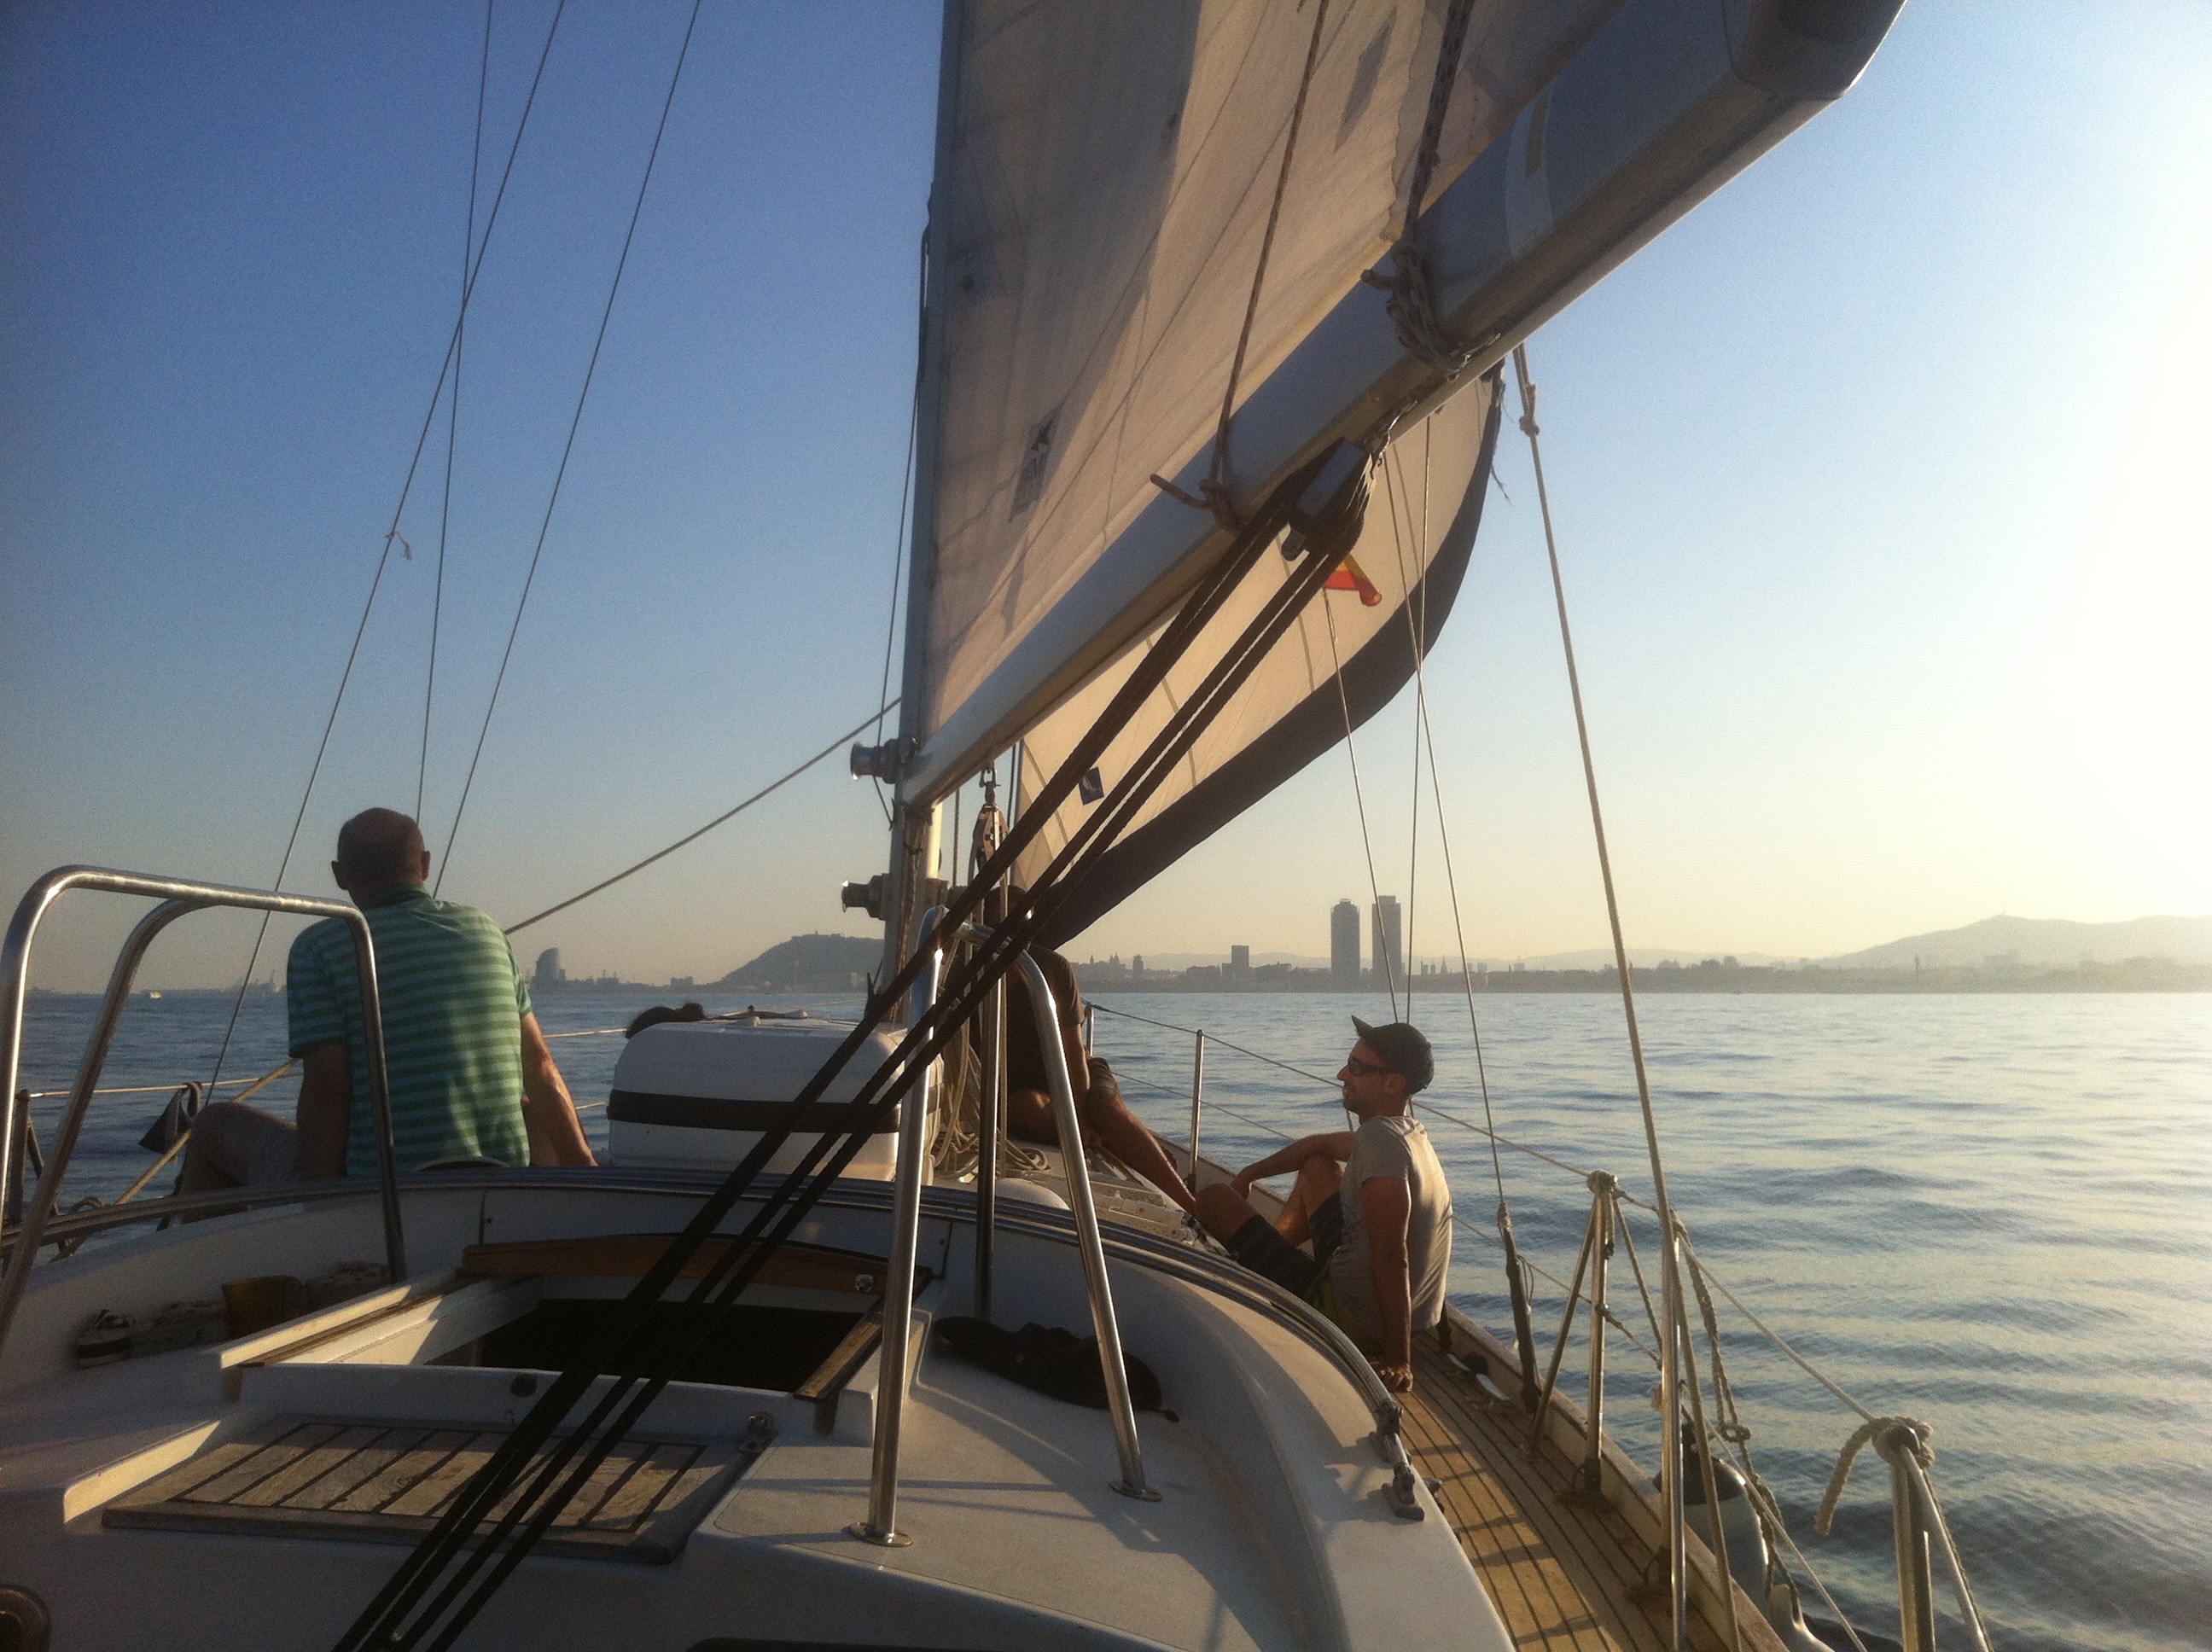 Private tour on a sailing boat in Barcelona